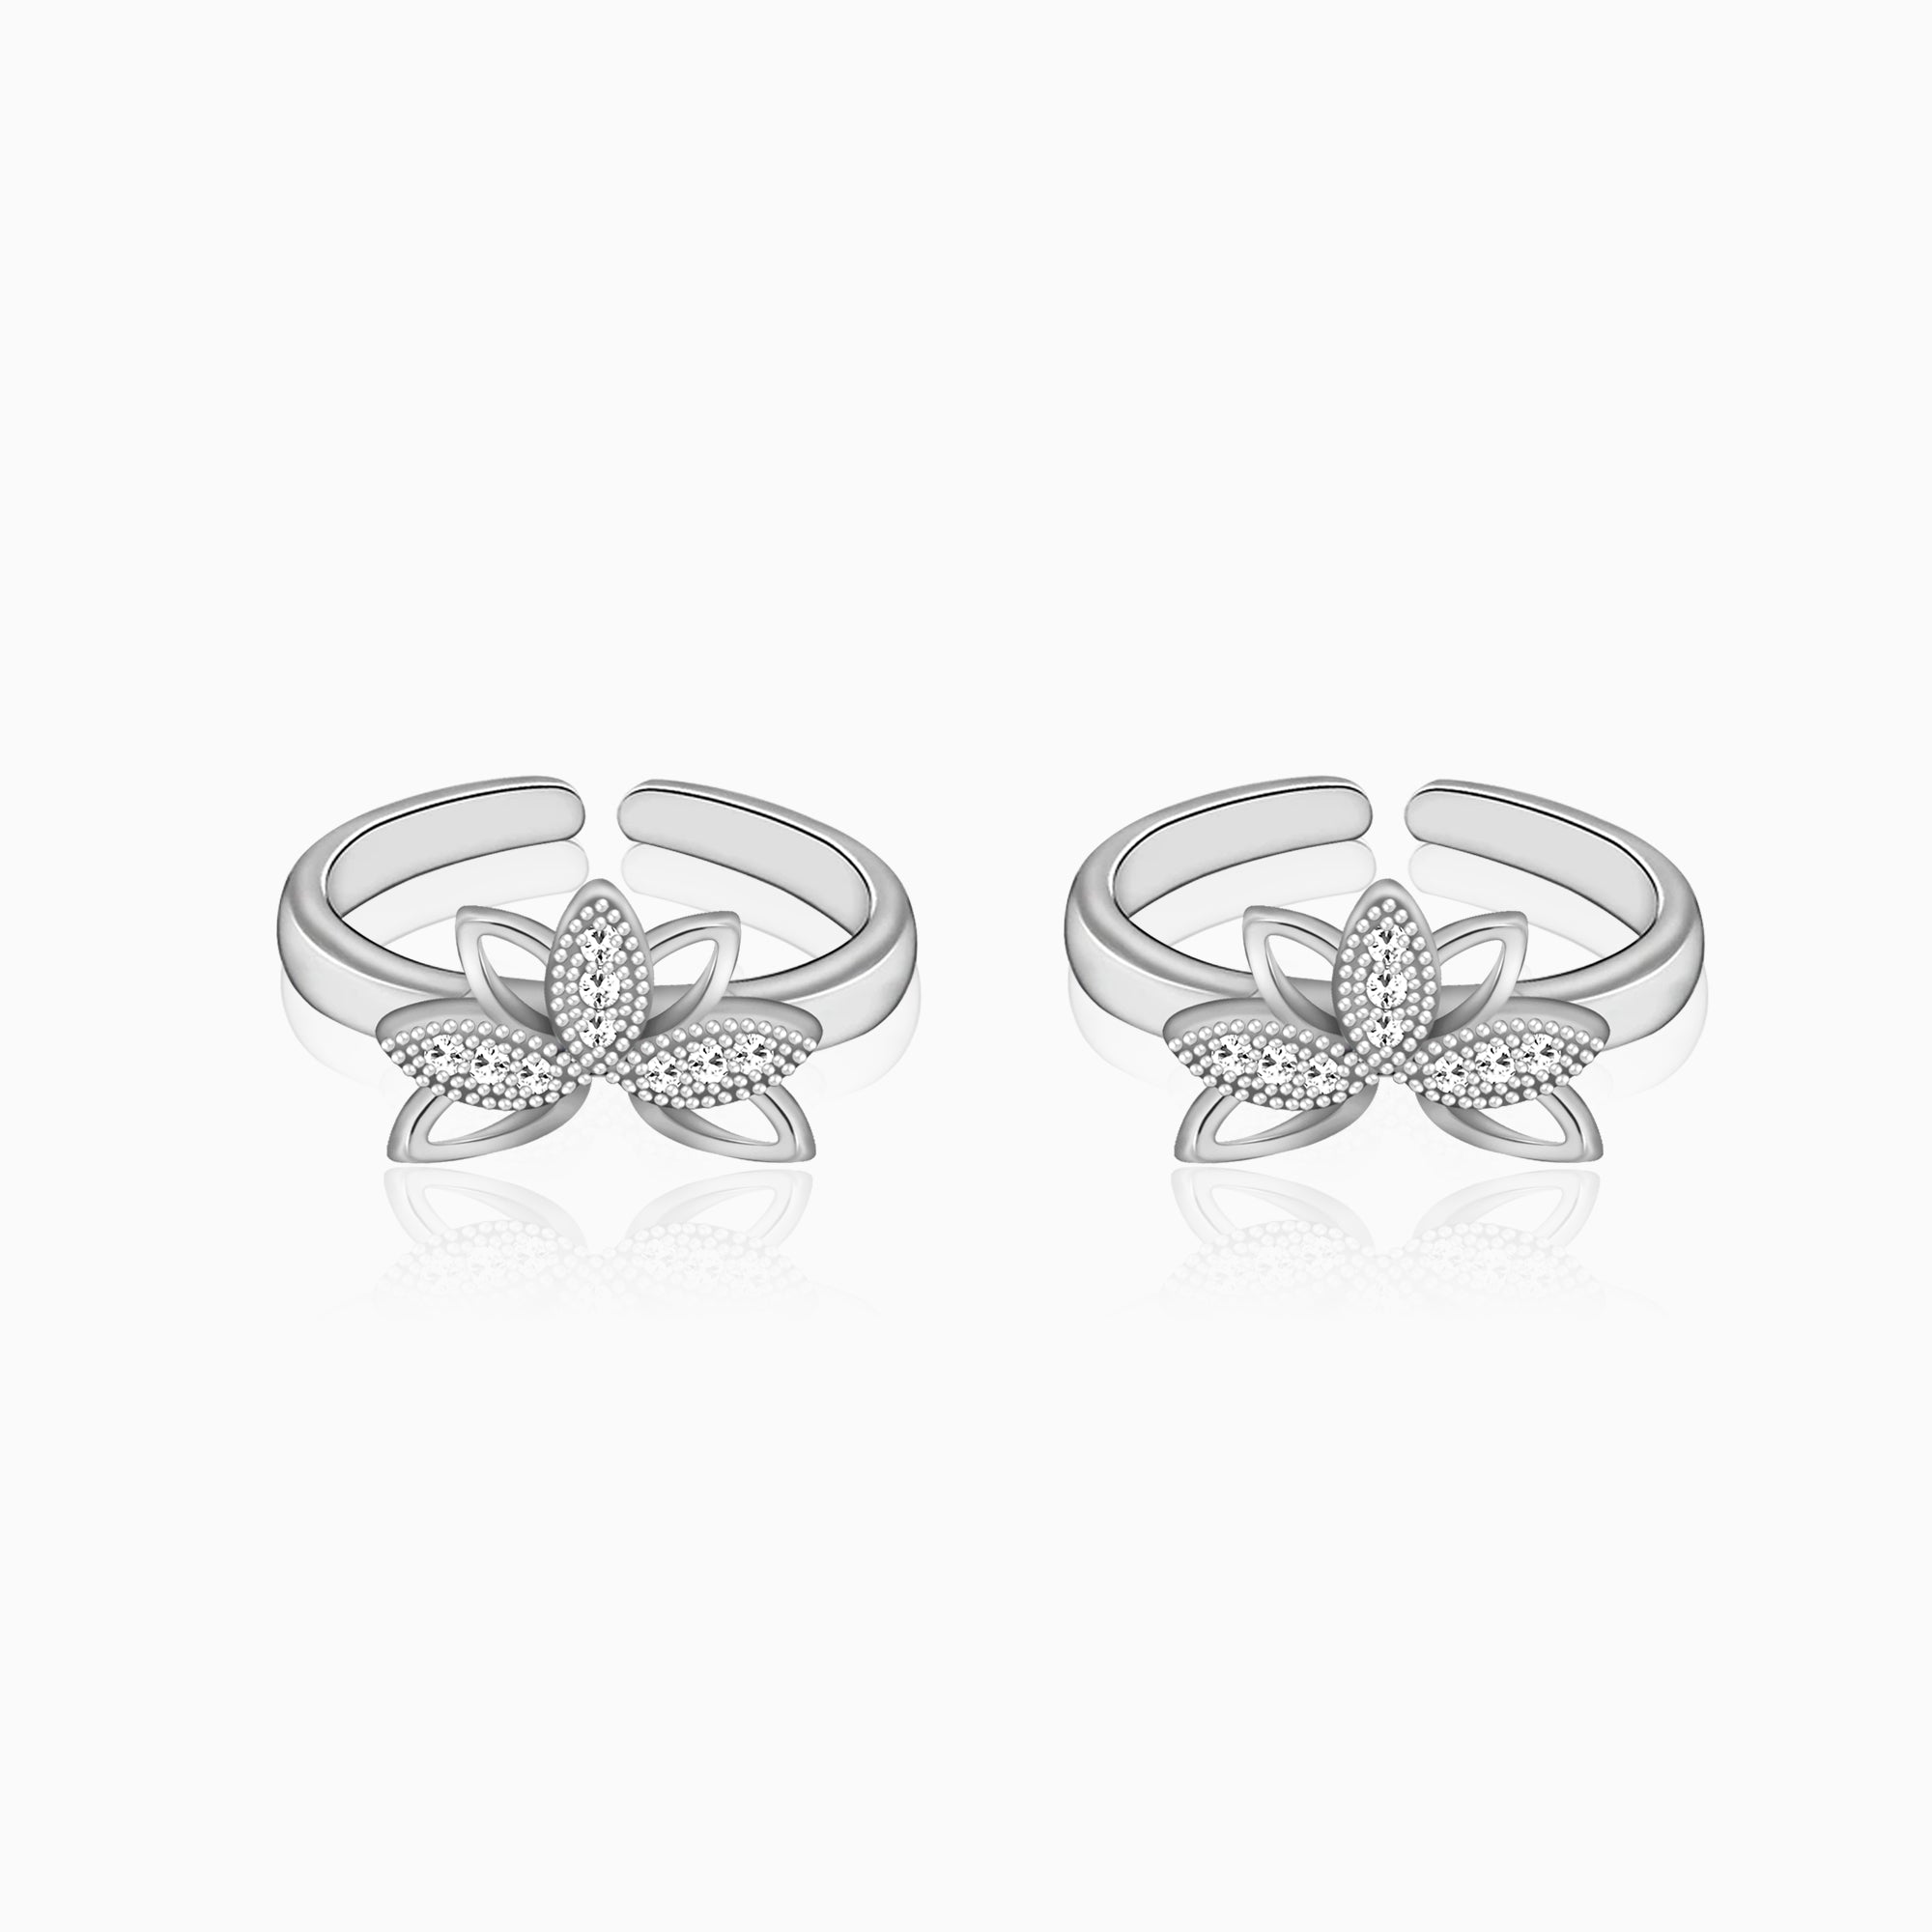 Buy Lotus Flower Sterling Silver Toe Ring or Midi Ring Adjustable Toe Ring  for Woman Online in India - Etsy